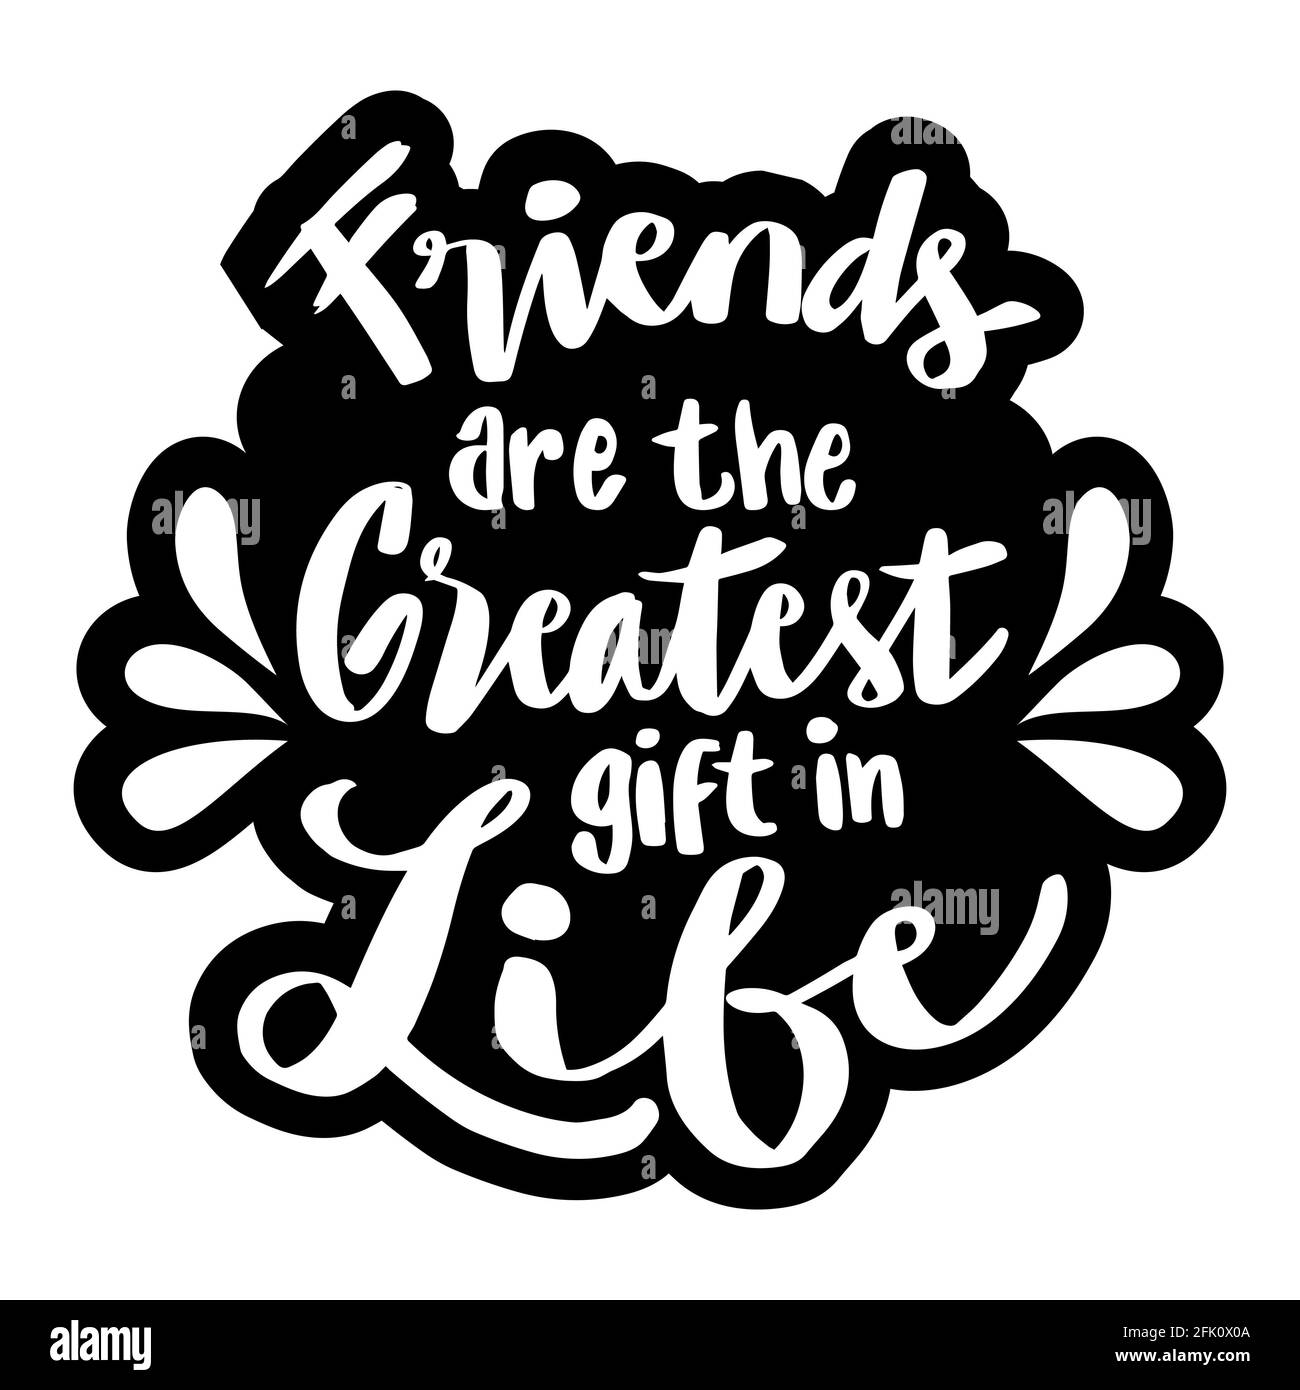 Friend are the greatest gift in life. Hand lettering. Motivational quote. Stock Photo